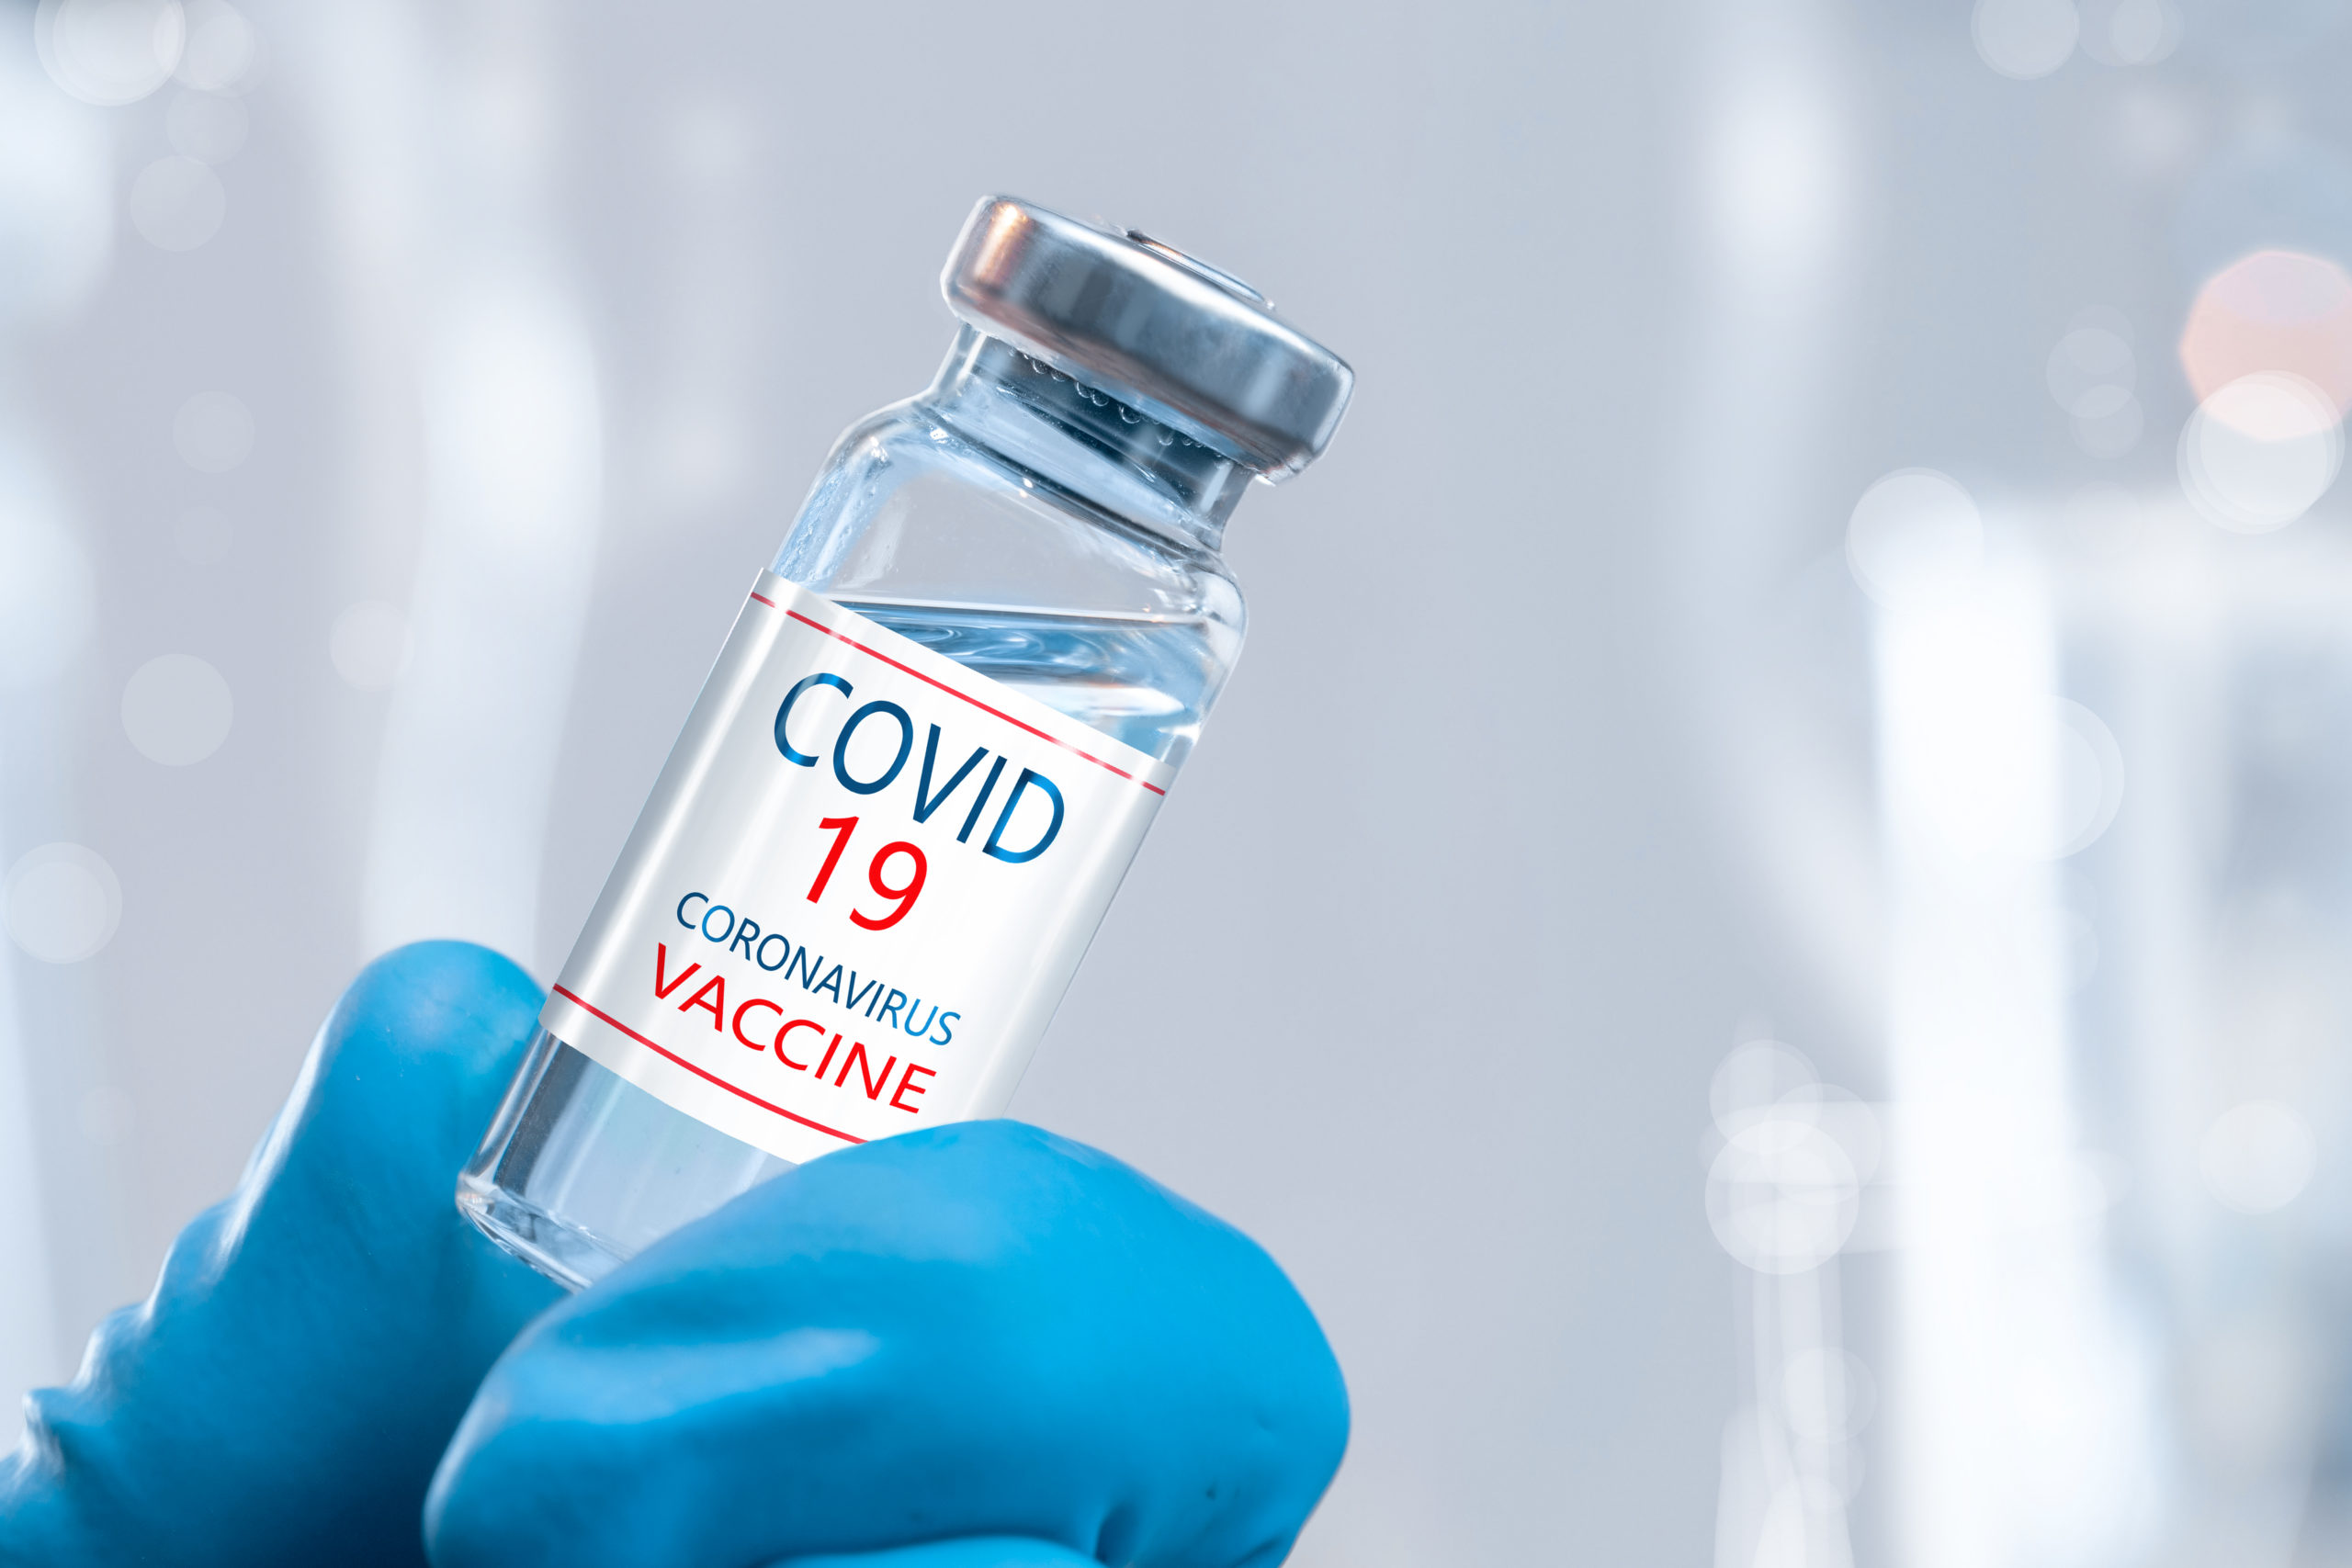 What you should know about the COVID vaccine rollout?